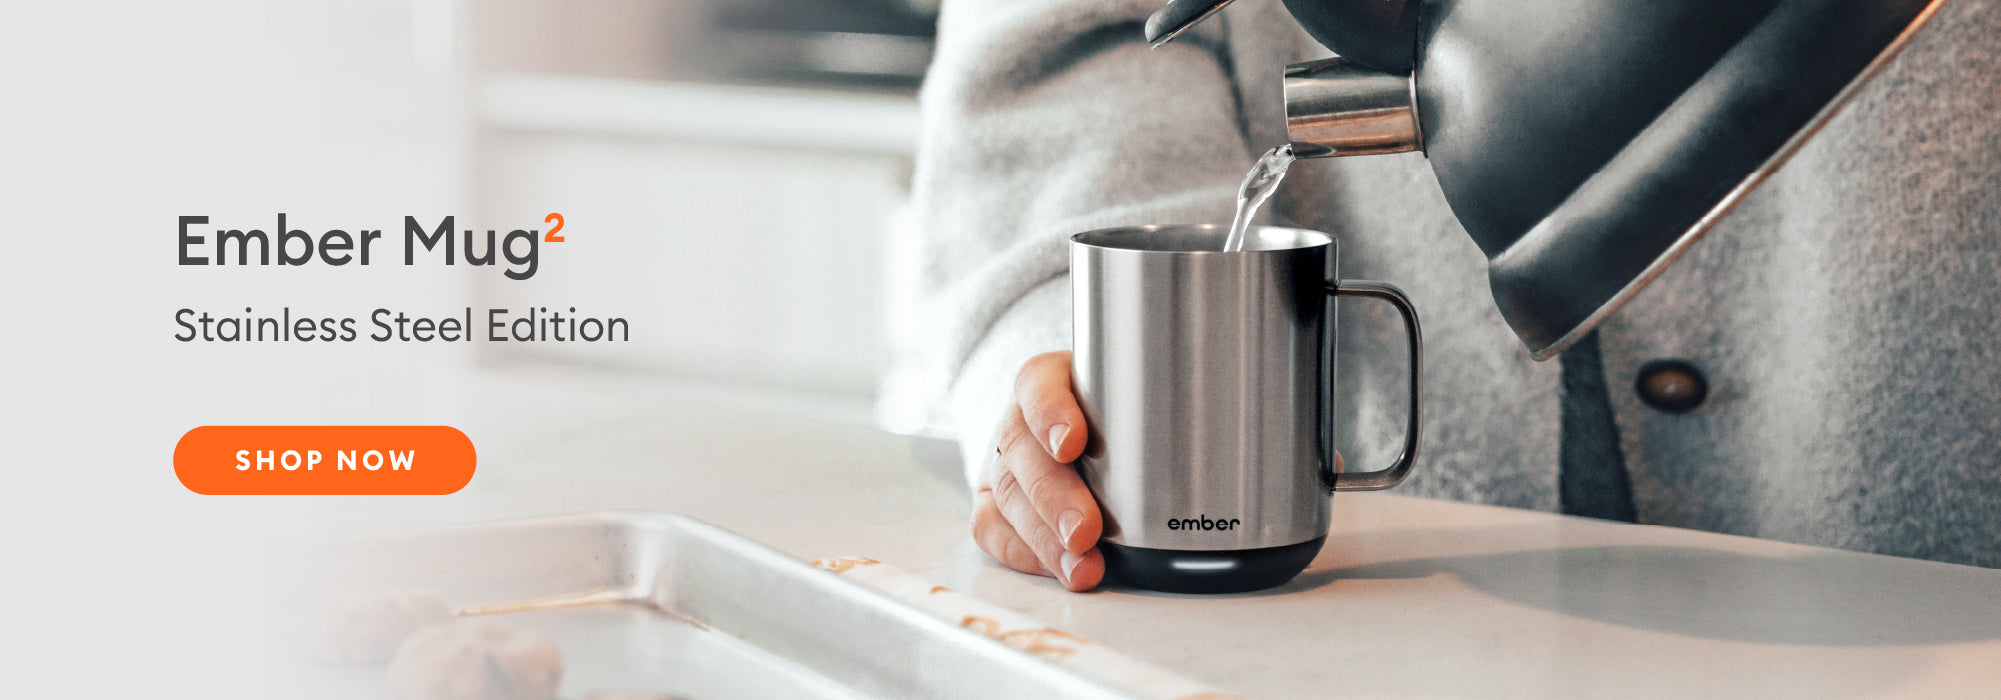 Hot water pouring into an Ember Mug2 Stainless Steel. Shop Now.